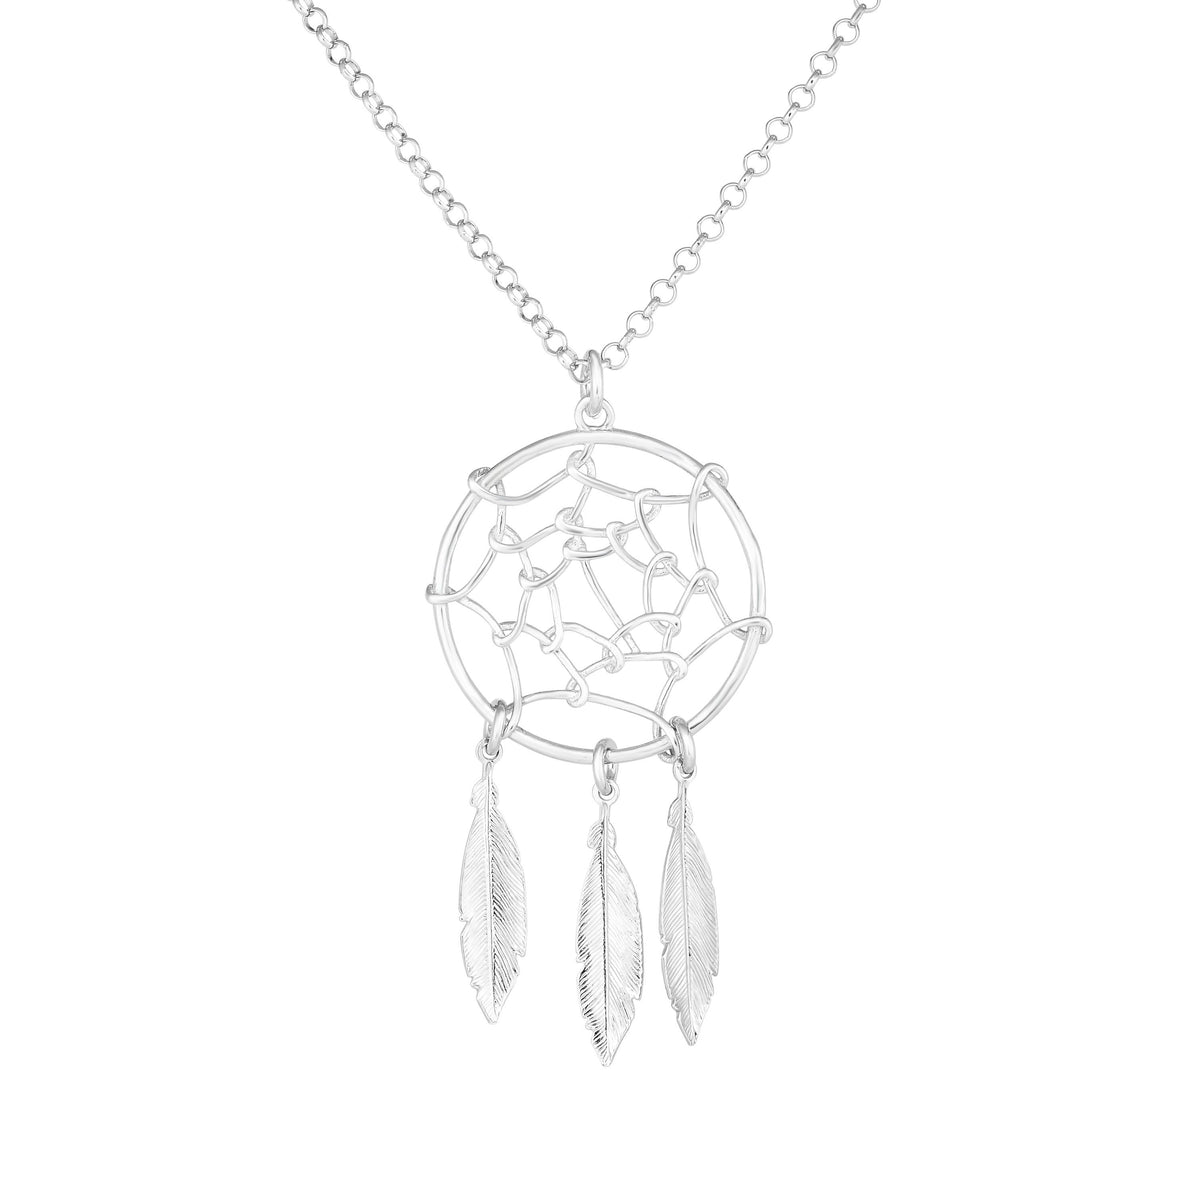 Sterling Silver Dream Catcher Charm Necklace, 17"